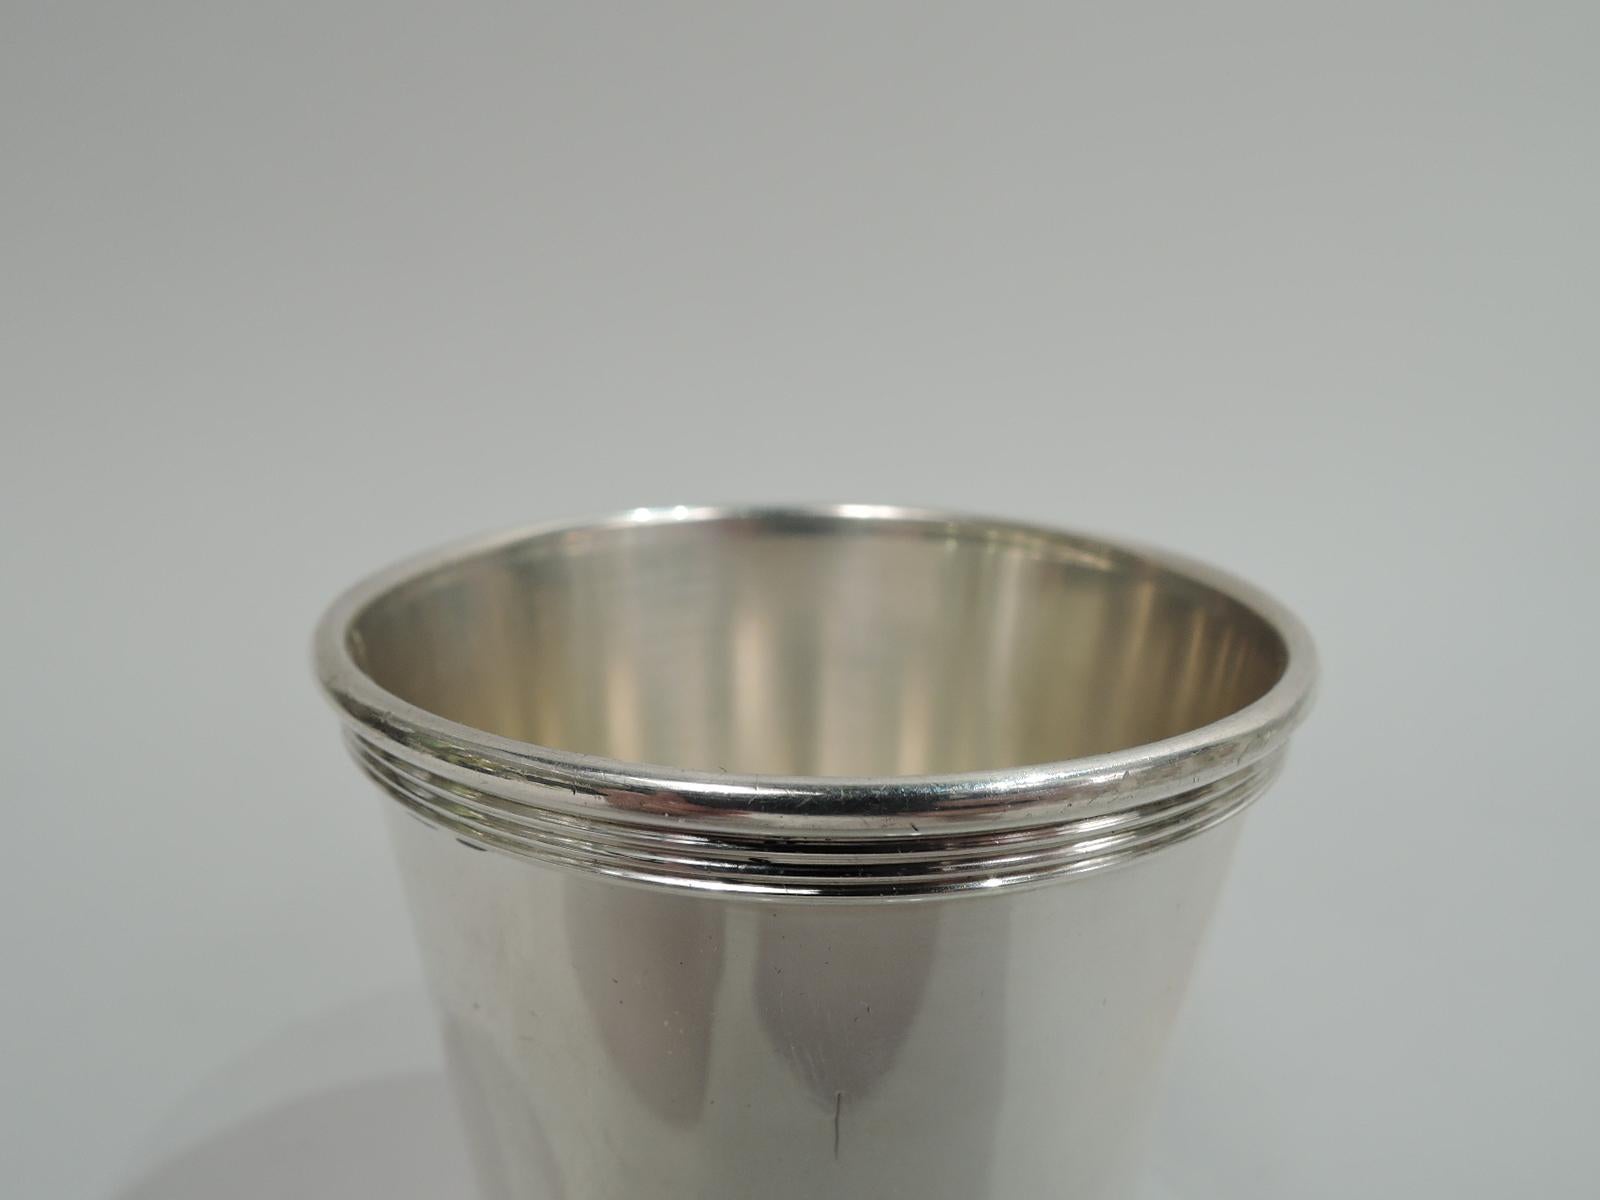 Modern sterling silver shot glass. Made by Manchester in Providence. Straight and tapering sides, and reeded rim and base. On underside is engraved presentation: “For / 19 years loyal service / with / Brown-Forman / 1965”. Fully marked including